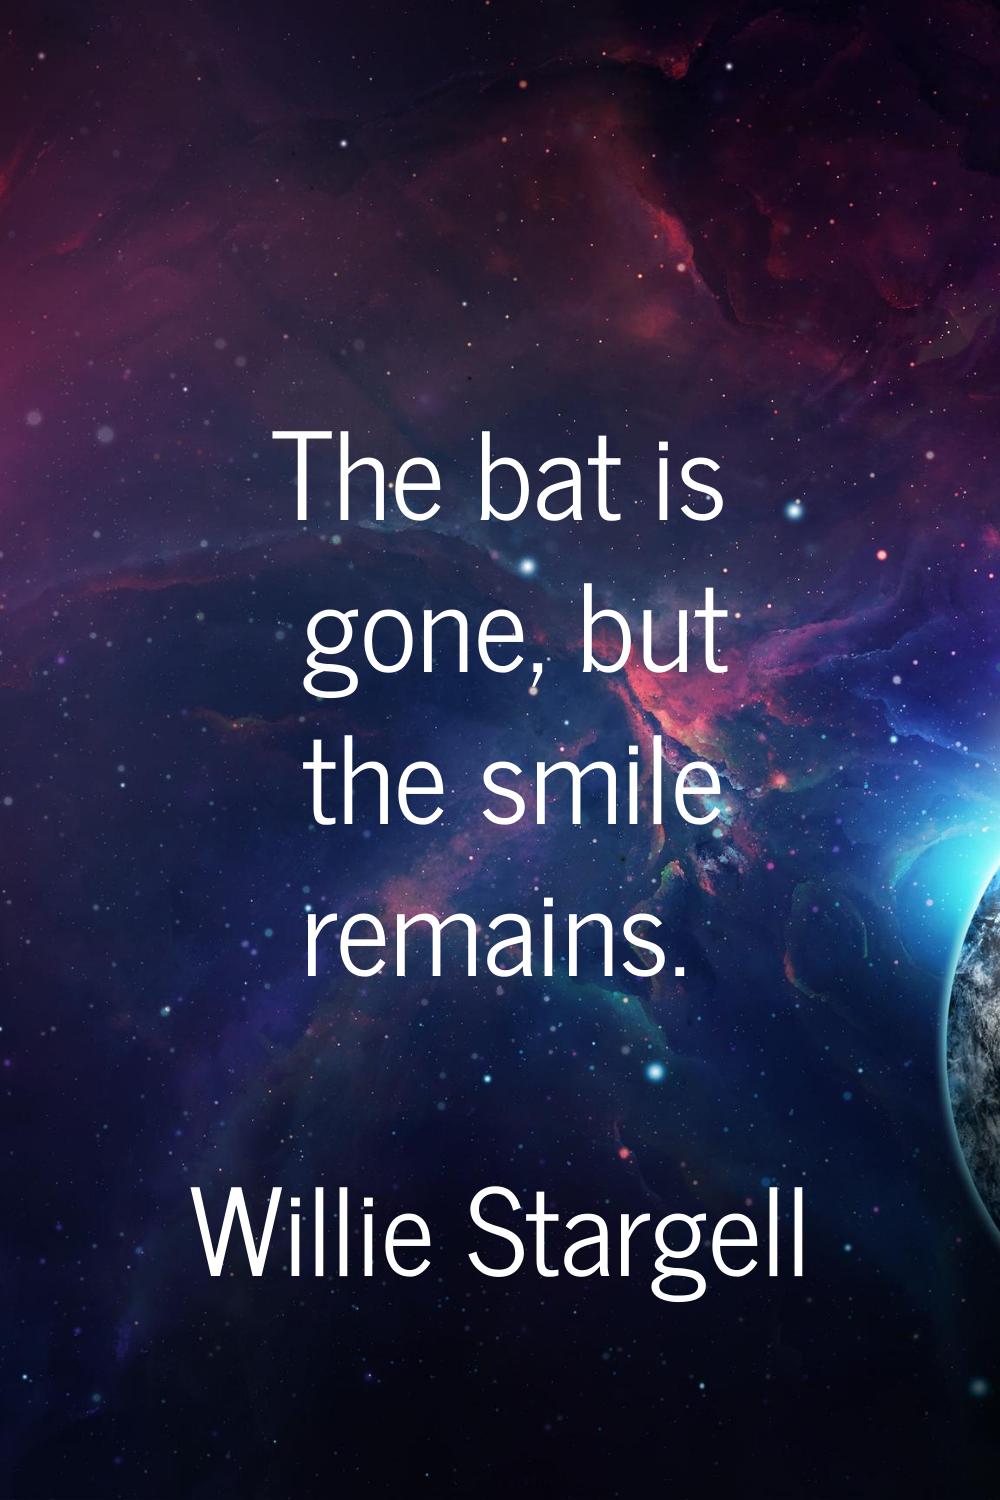 The bat is gone, but the smile remains.